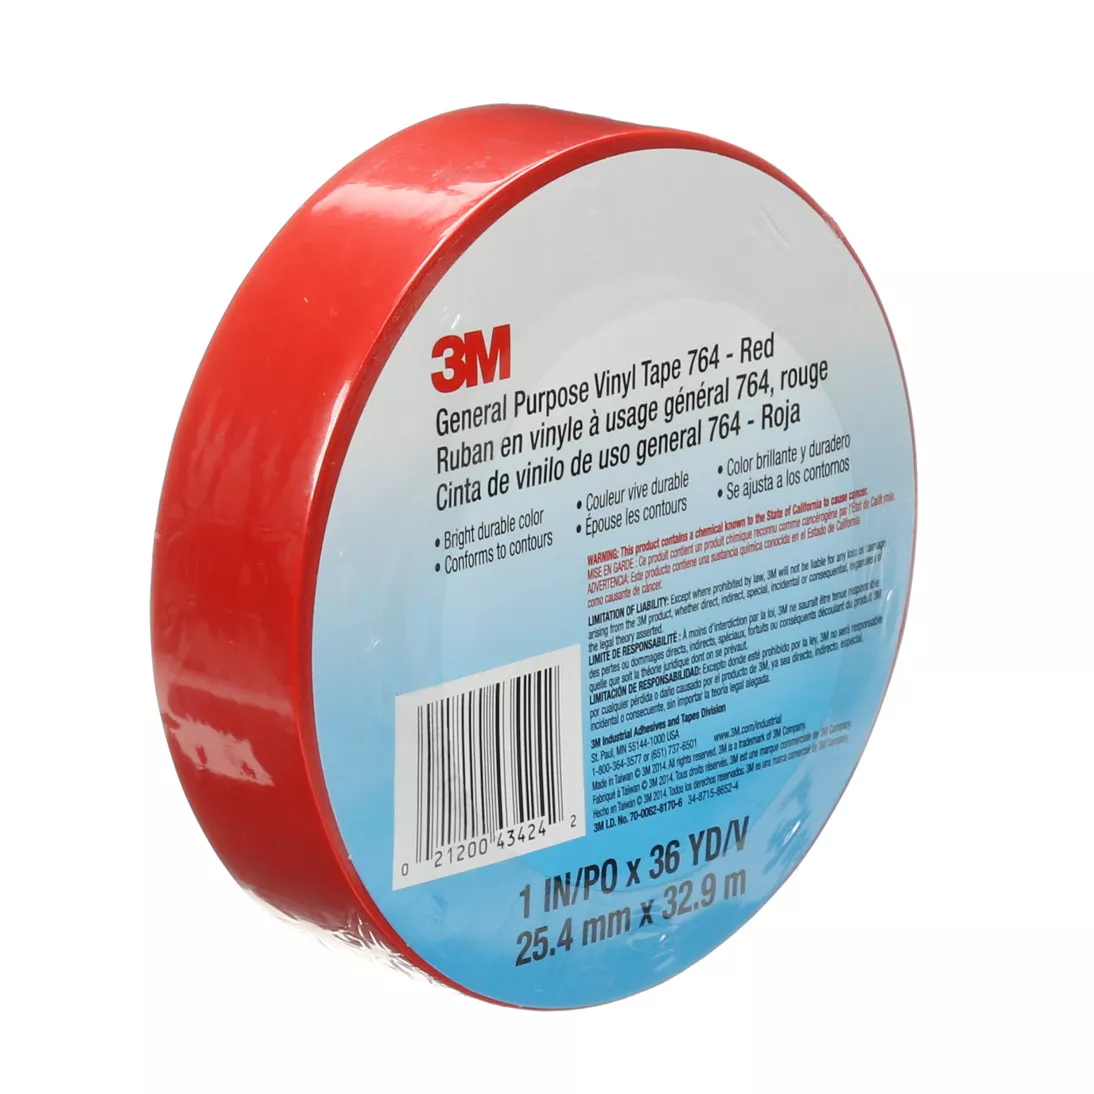 3M™ General Purpose Vinyl Tape 764, Red, 1 in x 36 yd, 5 mil, 36 Roll/Case, Individually Wrapped Conveniently Packaged